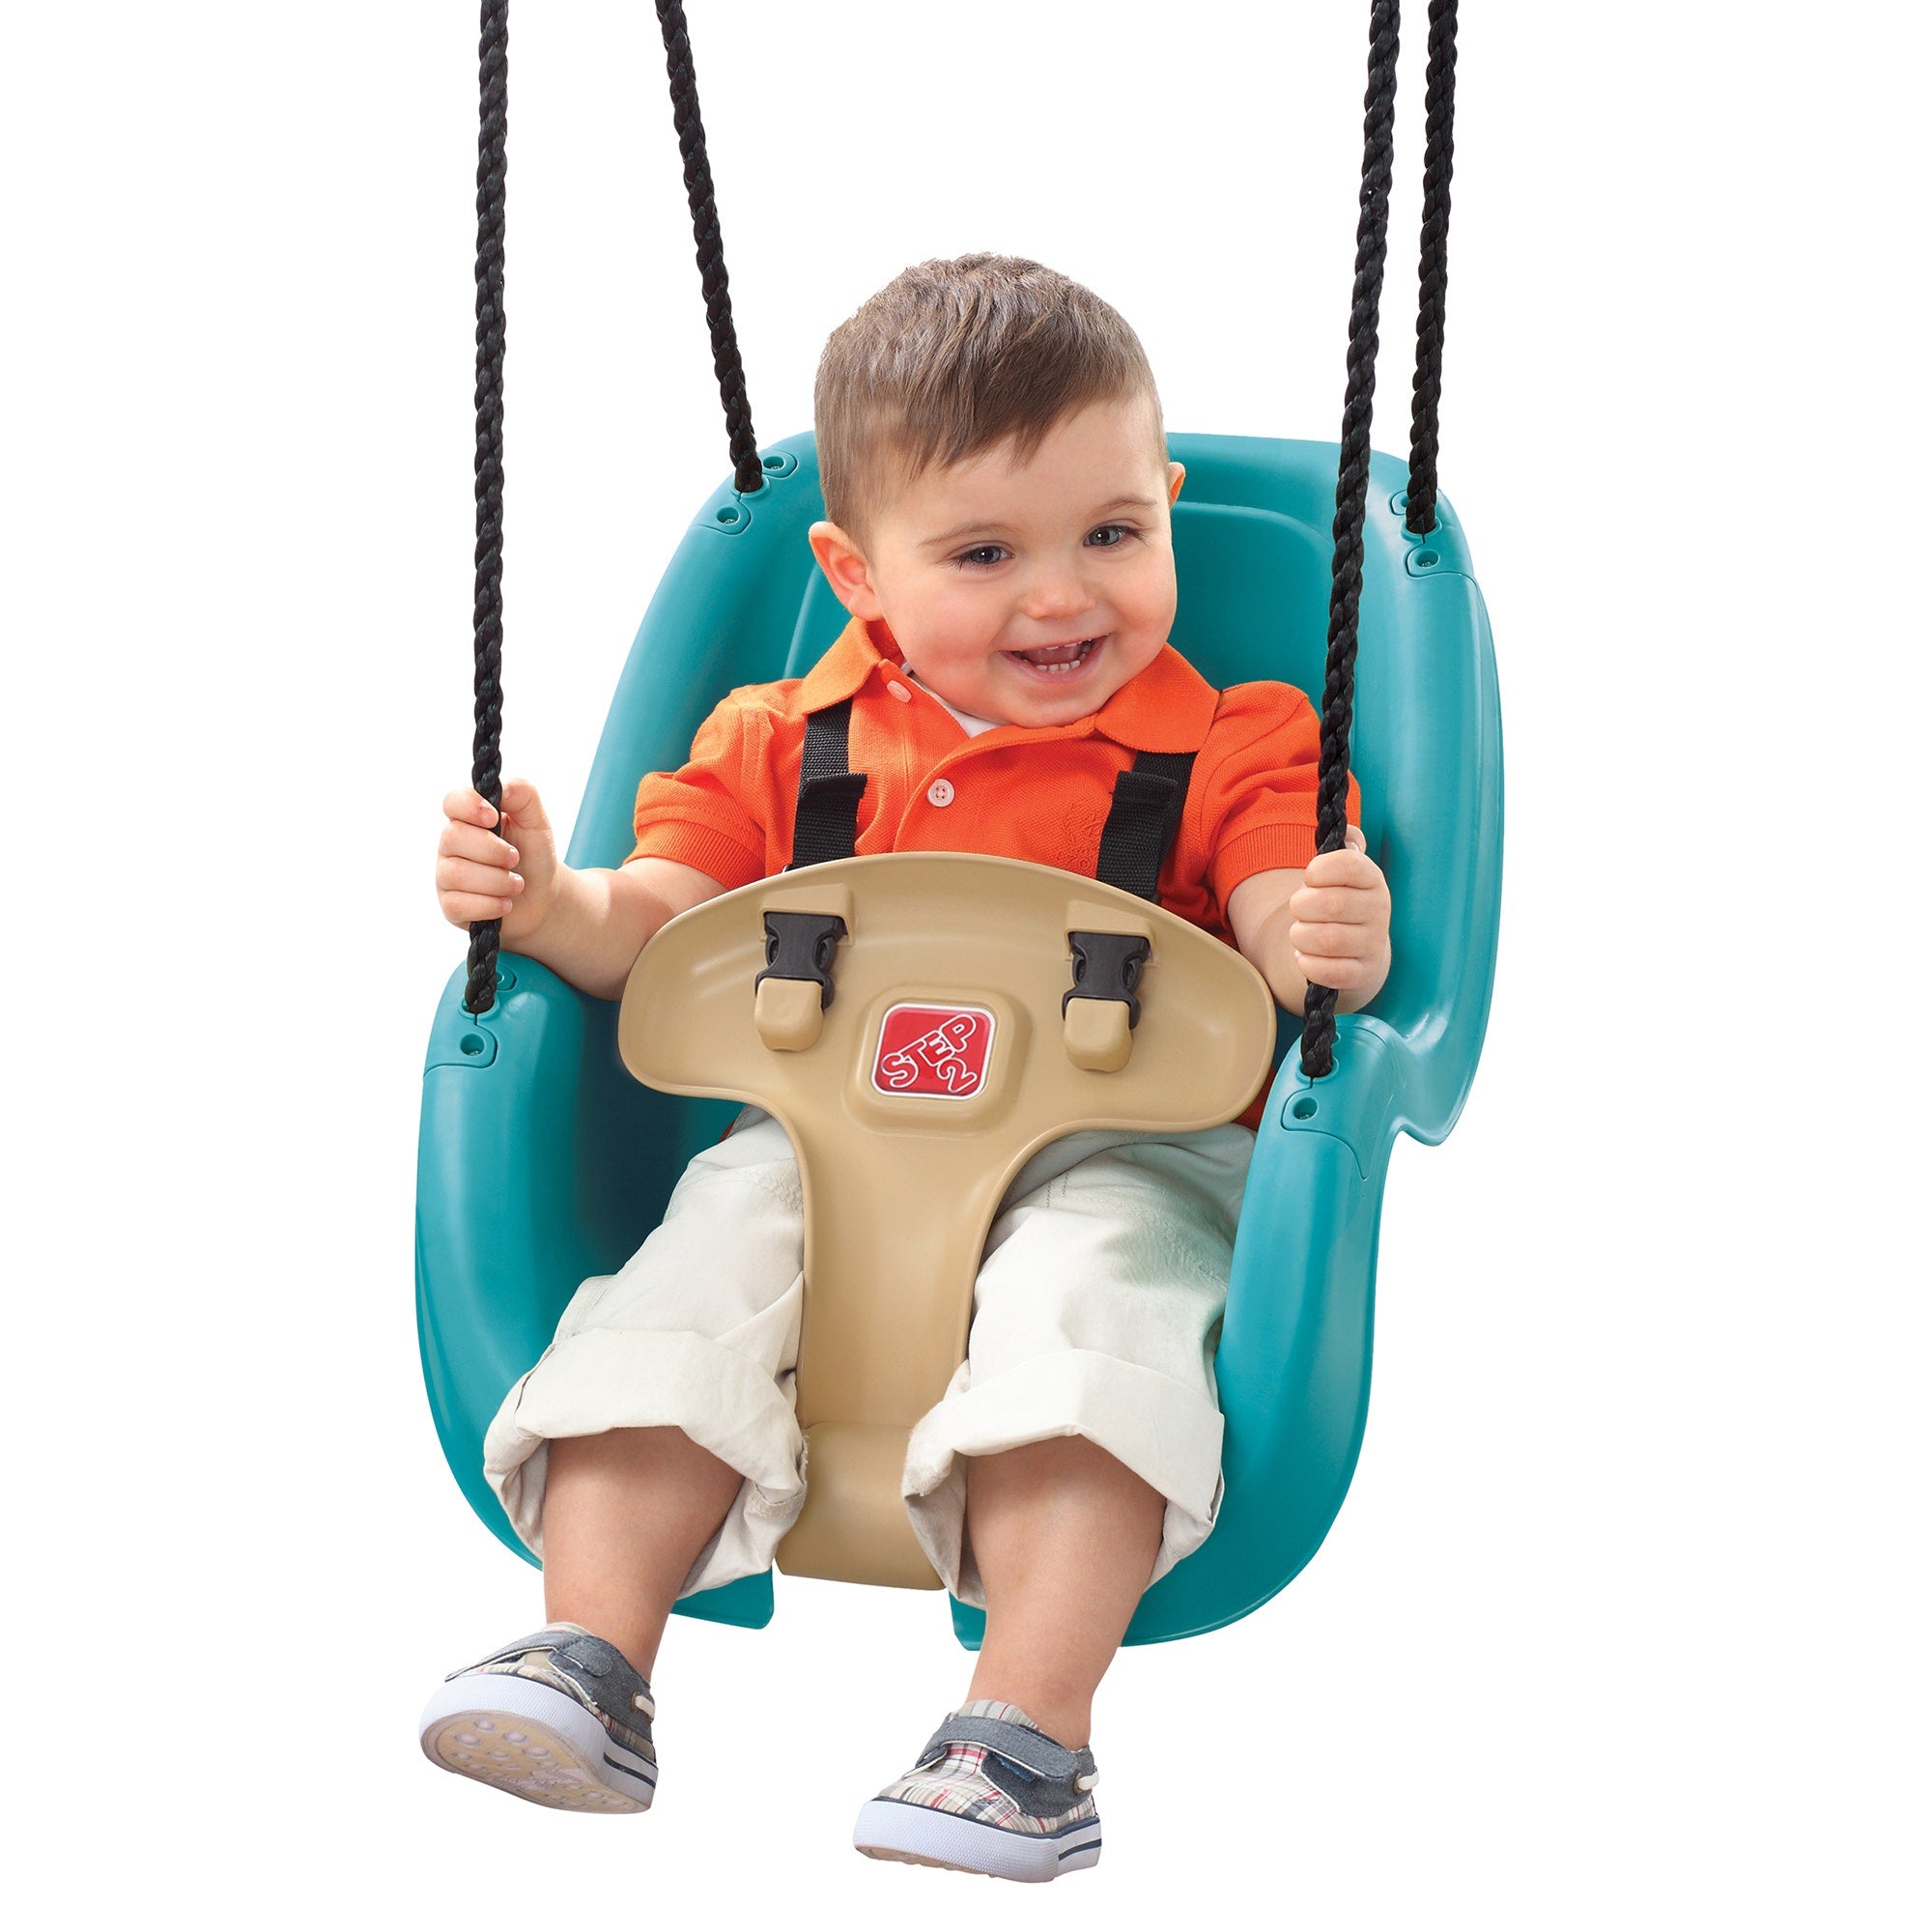 How to Choose an Infant Swing